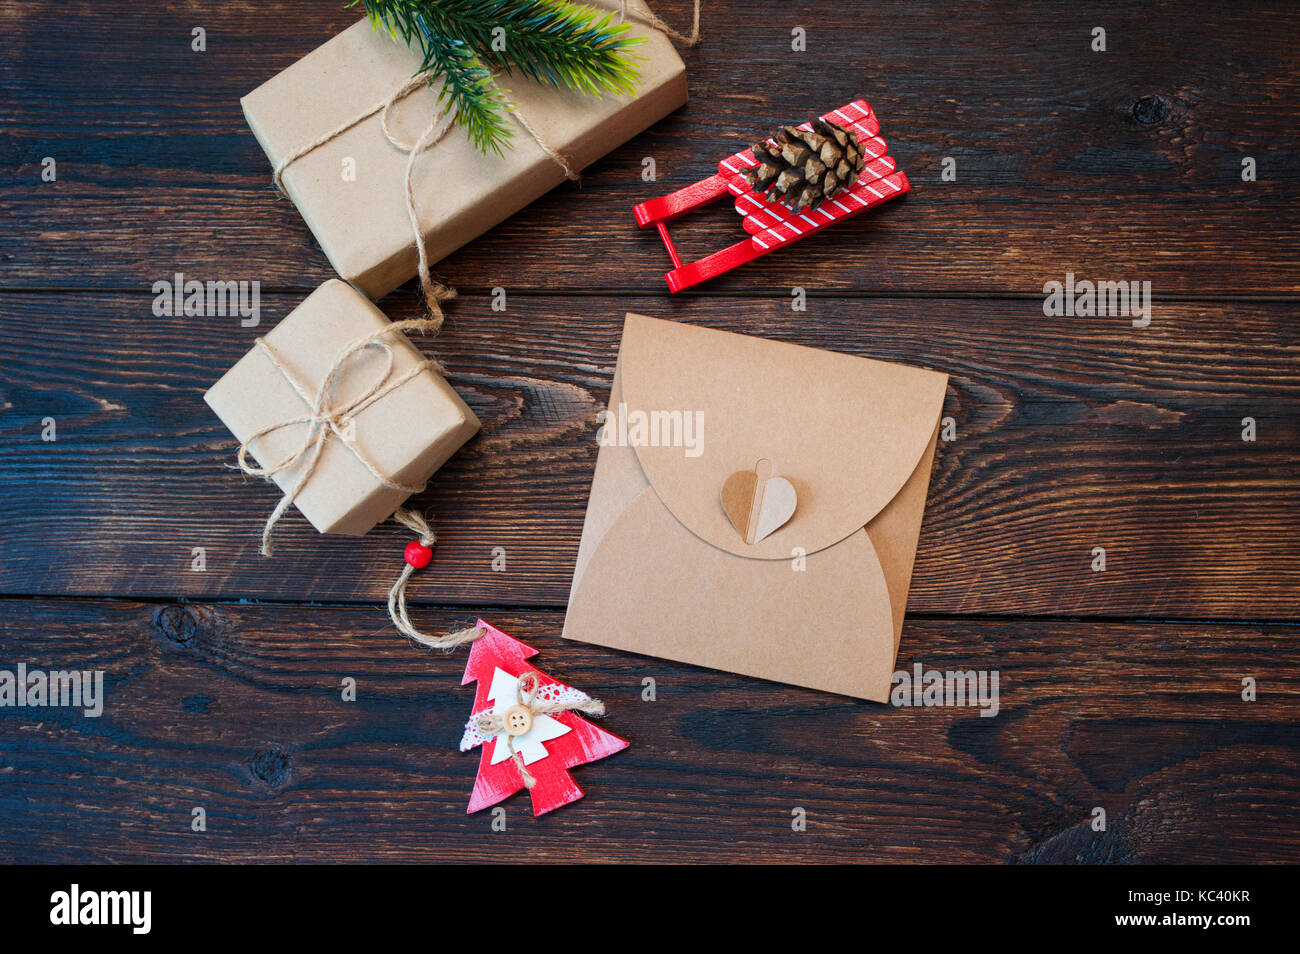 Mokcup Christmas composition of gift boxes and wooden toys on a background and place for text Stock Photo